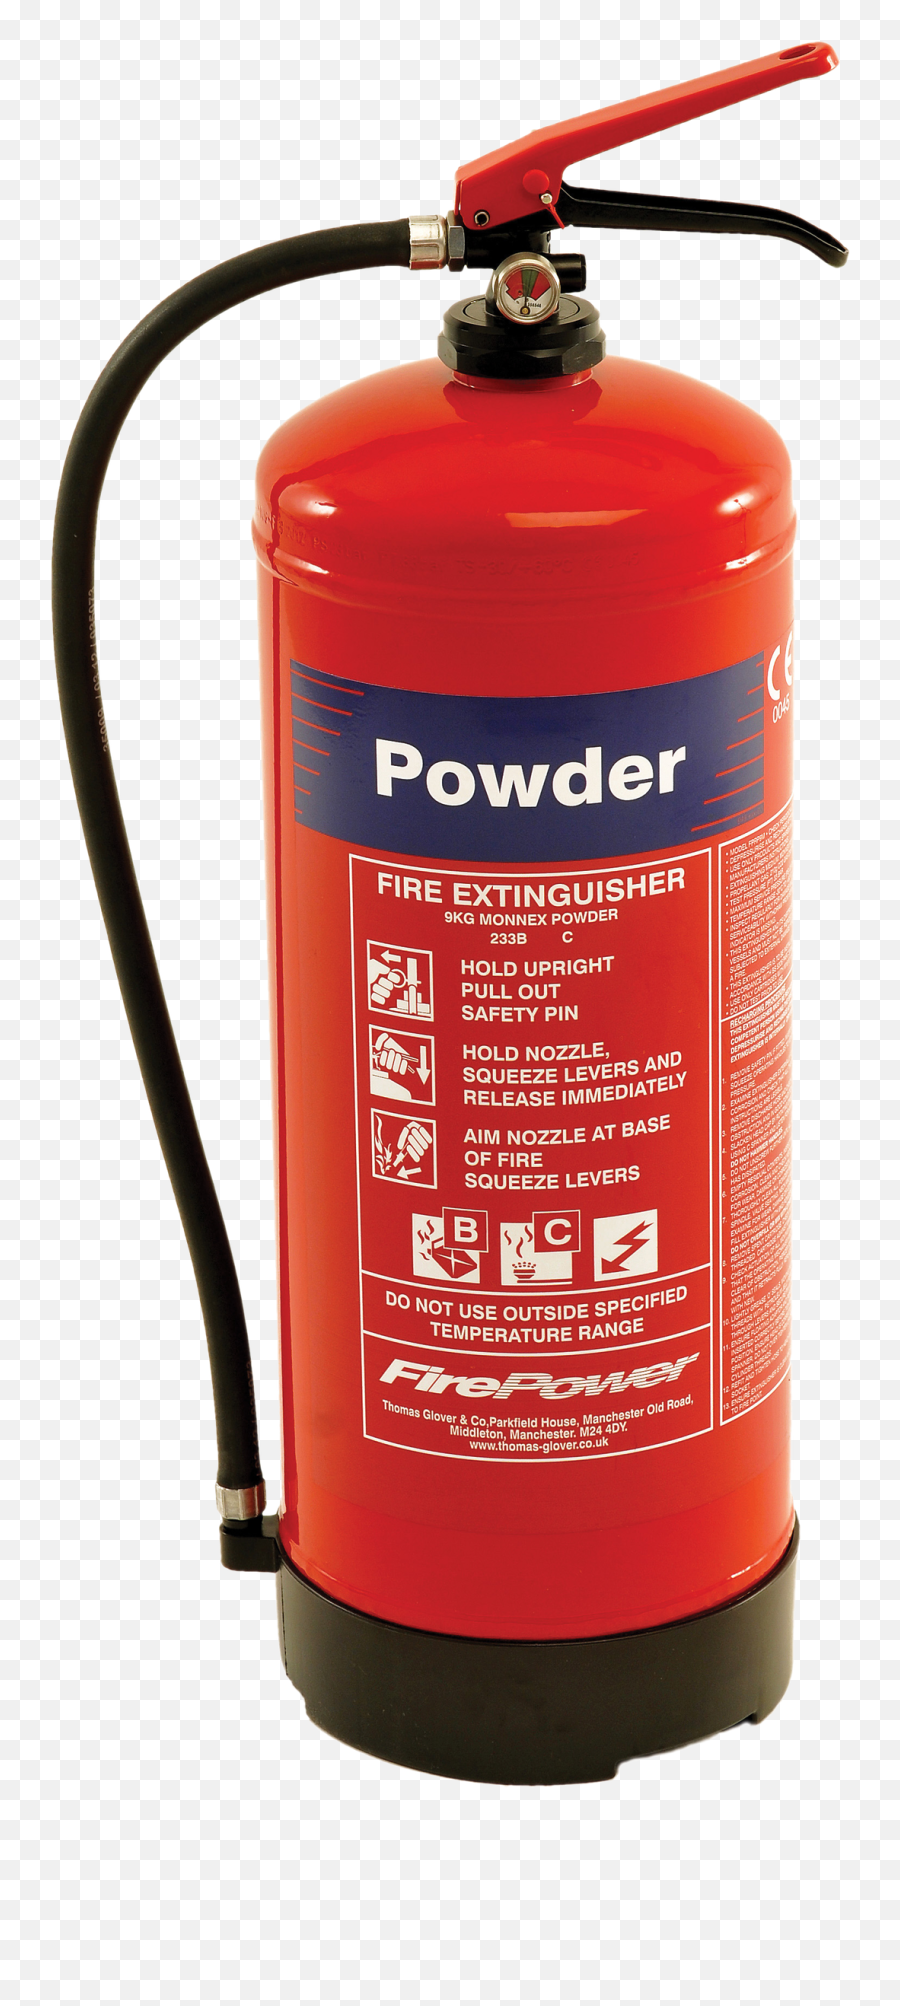 Fire Extinguisher Png Transparent - Fire Extinguisher Powder 4kg,Fire Extinguisher Png